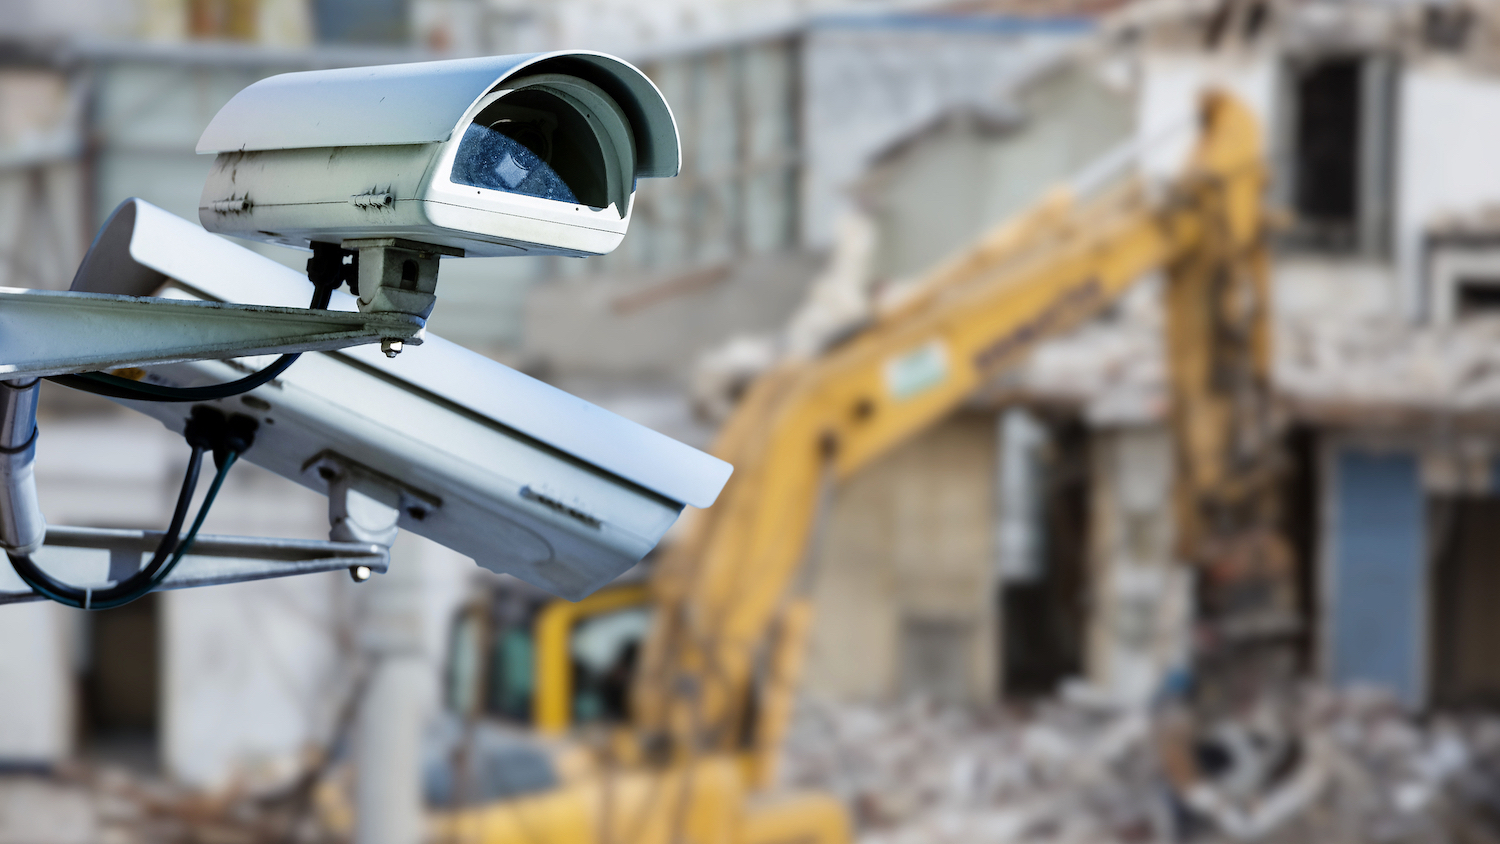 Image of CCTV on a construction site - site security story